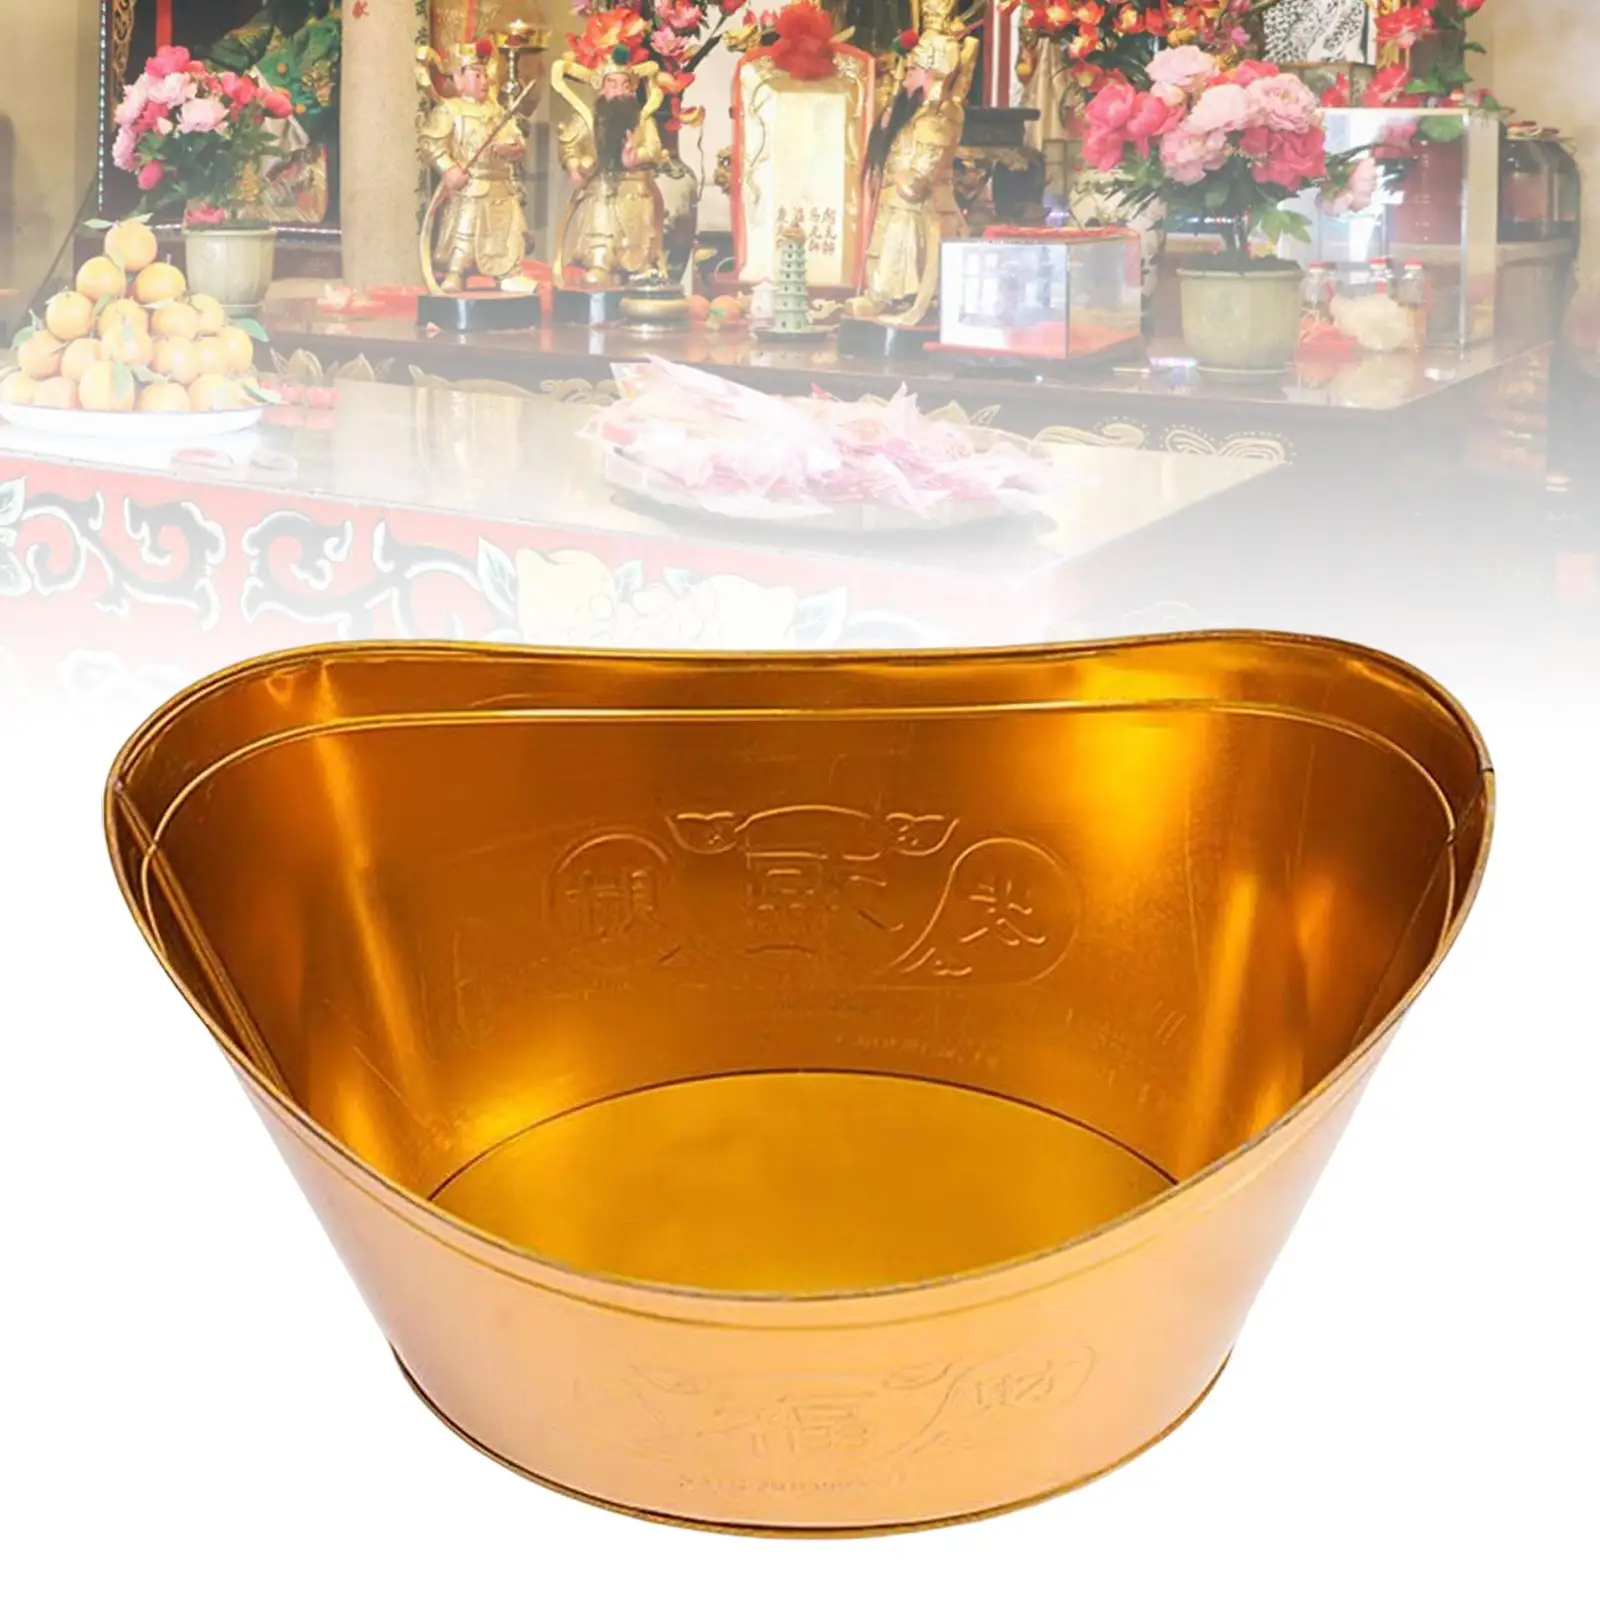 Feng Shui Treasure Basin Collectible Wealth Cornucopia Altar Use Offering Bowl for Table Centerpieces Office Desk Home Decor